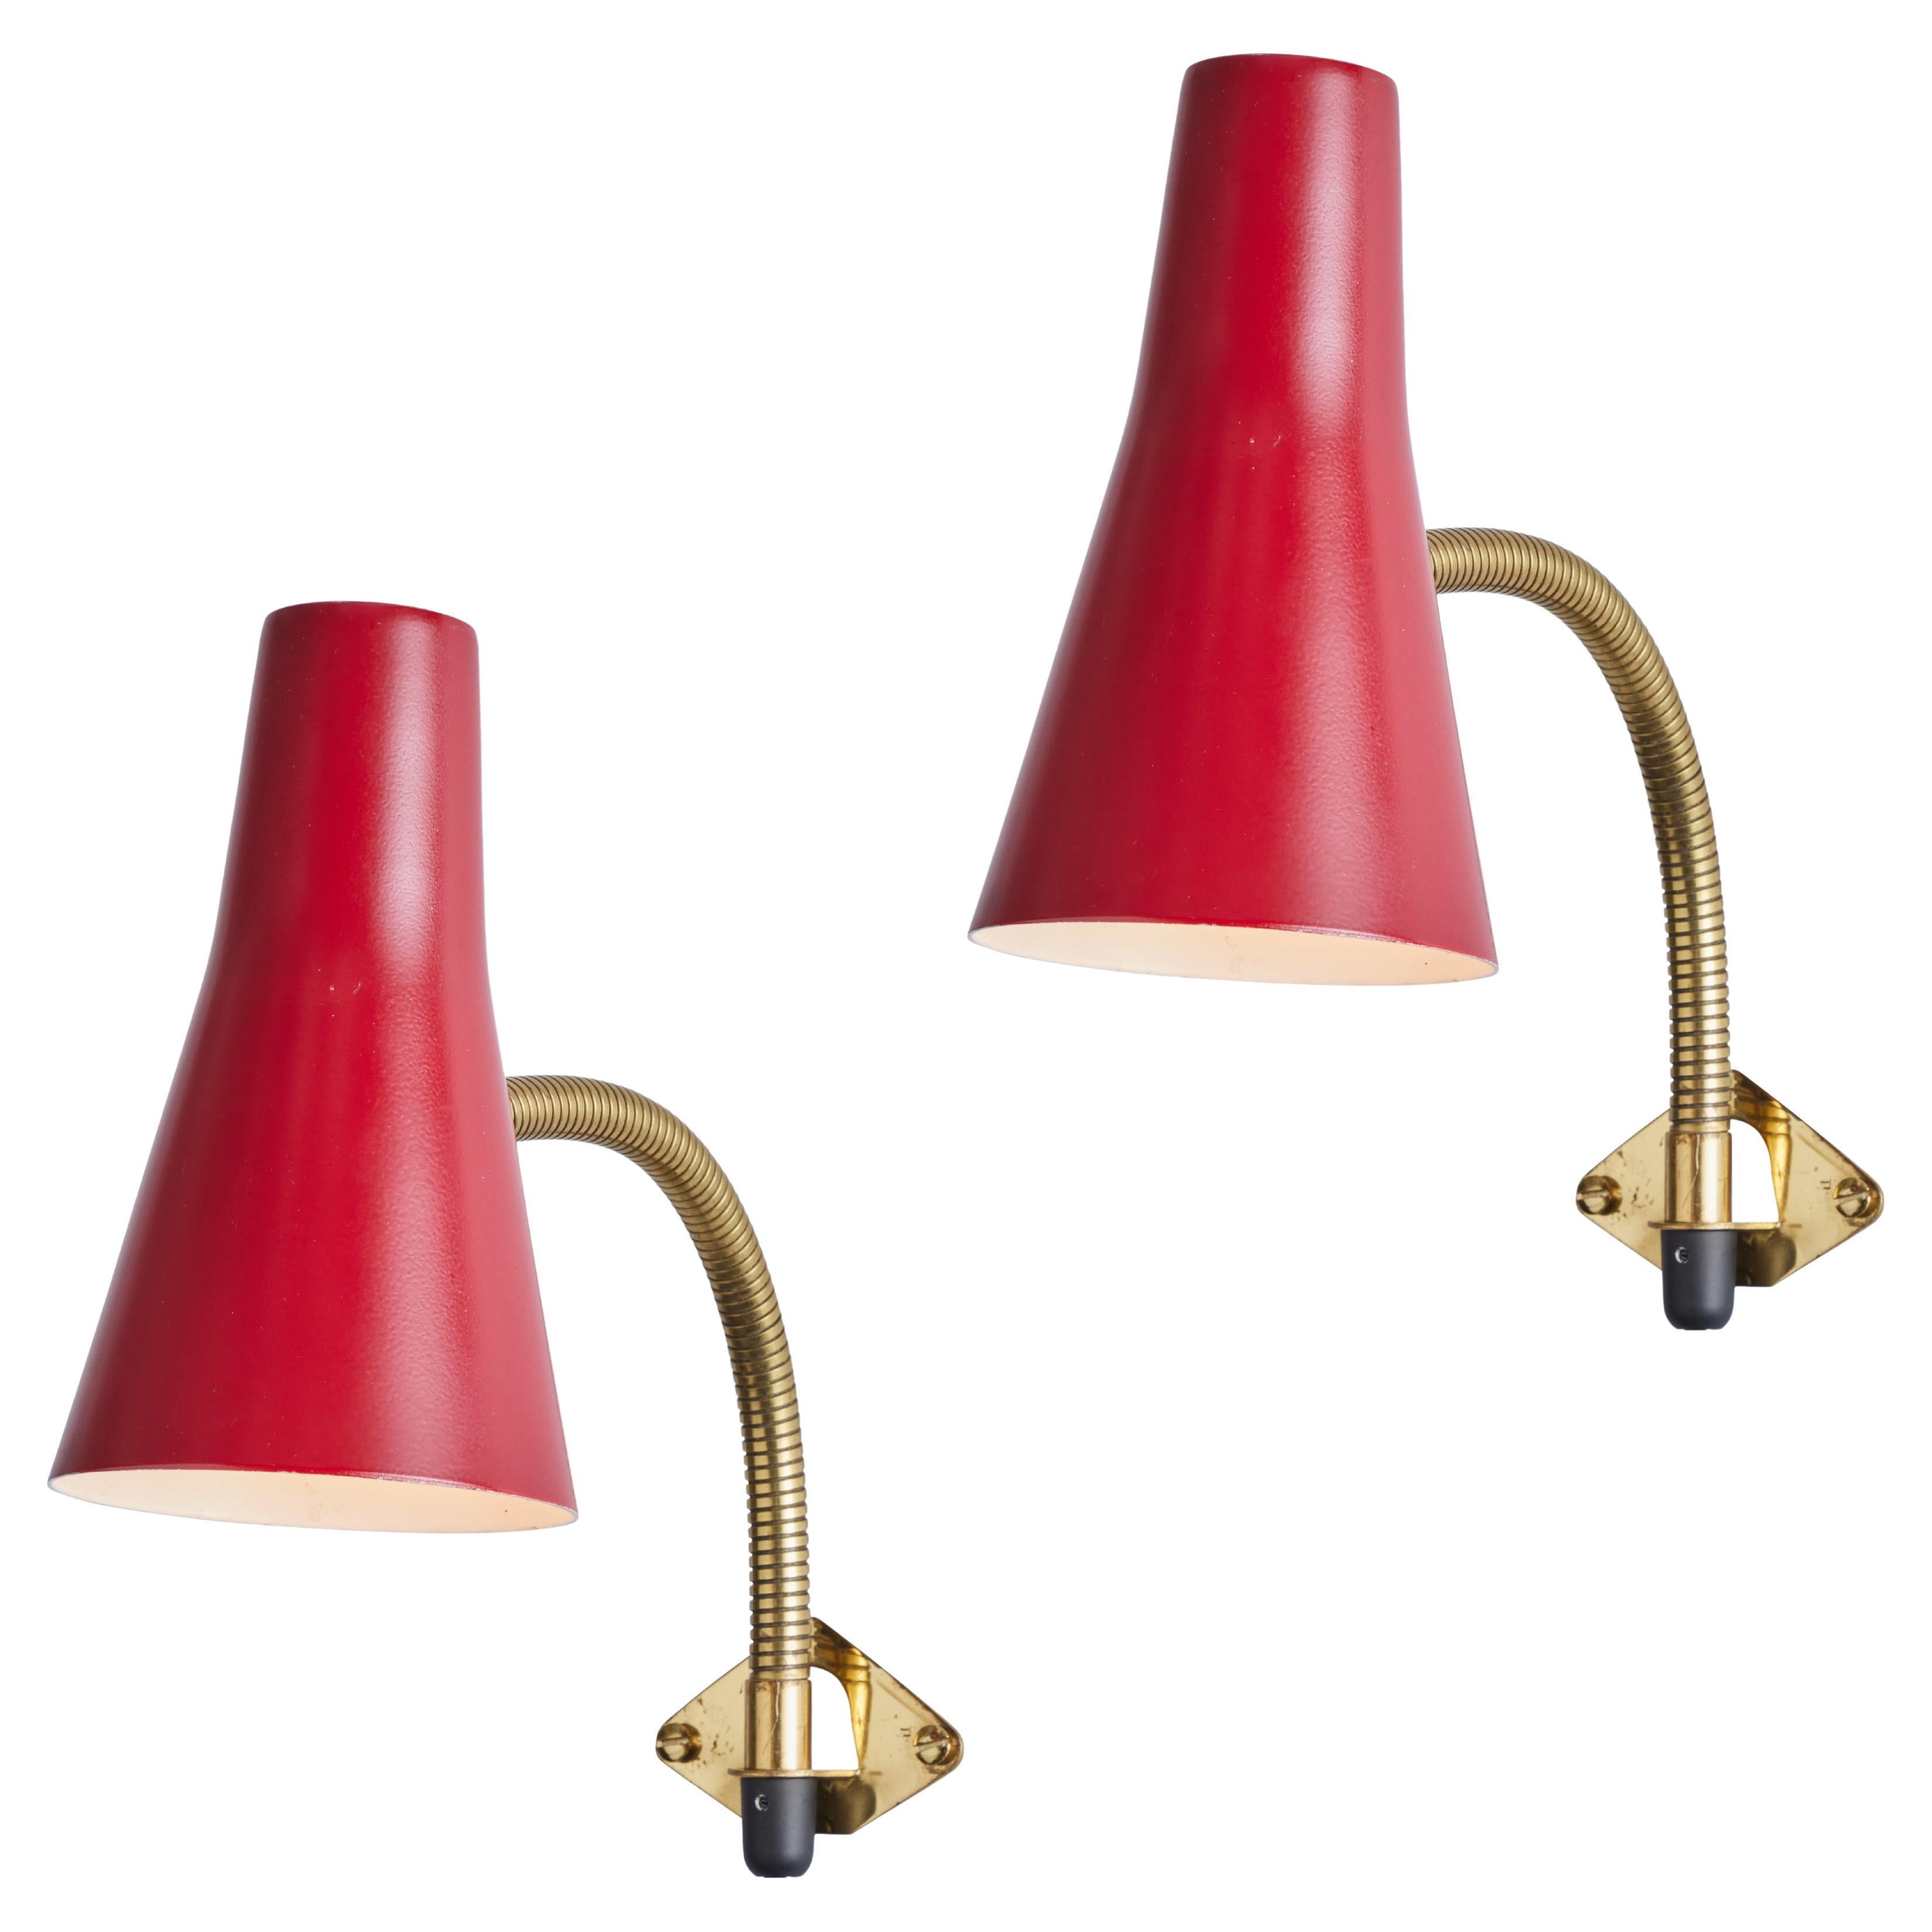 Pair of 1950s Lisa Johansson Pape Red Adjustable Wall Lights for Stockmann Orno